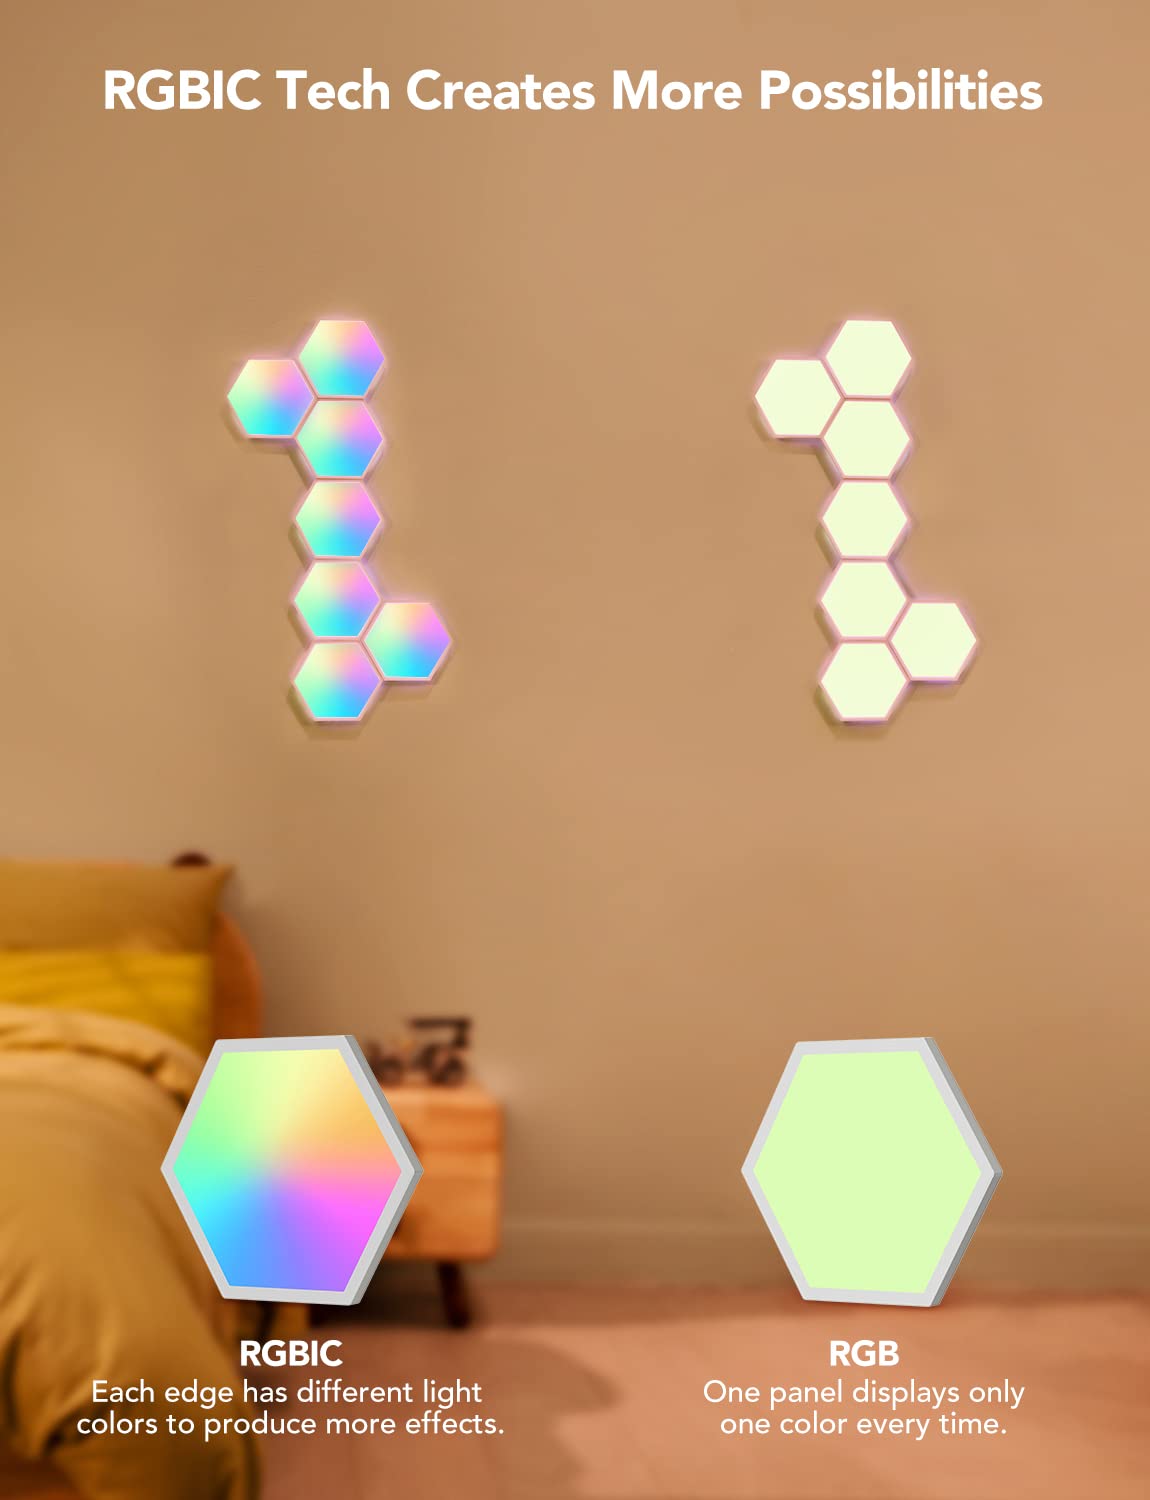 Govee Hexagon Light Panels, Smart LED, Glide Hexa RGBIC Wall Lights with Music Sync & Scene Modes, Work with Alexa & Google Assistant for Gaming Room, Bedroom, Living Room Decor, 7 Pack